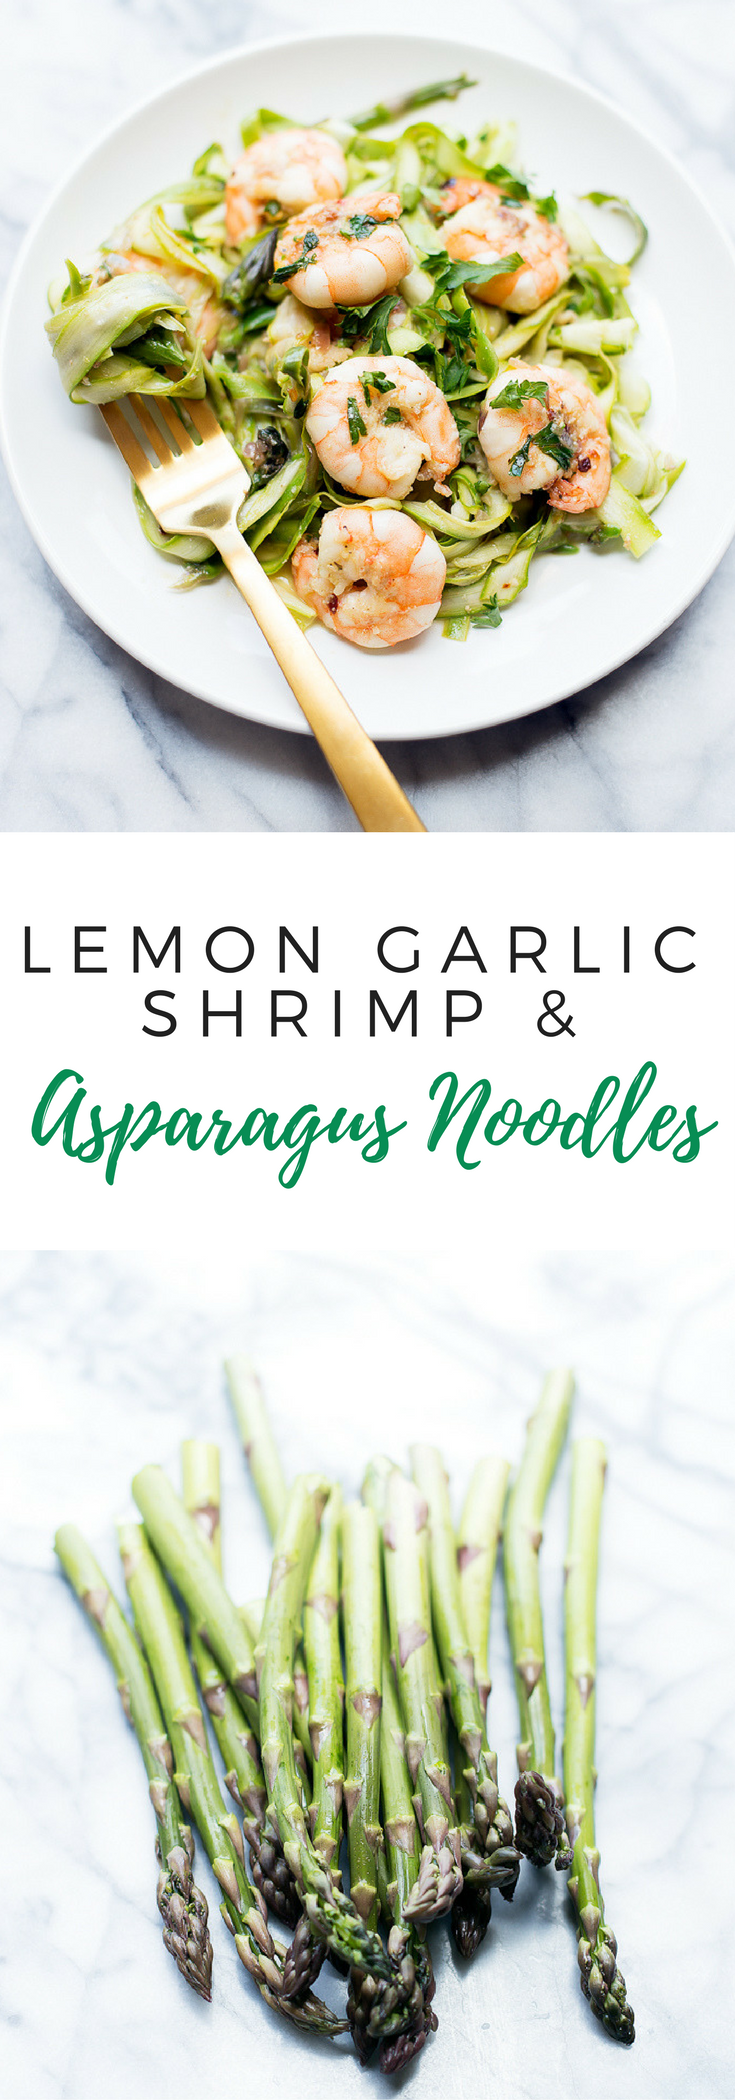 This lemon garlic shrimp with asparagus noodles is the perfect light summer dinner that is easy to make and comes together in minutes!